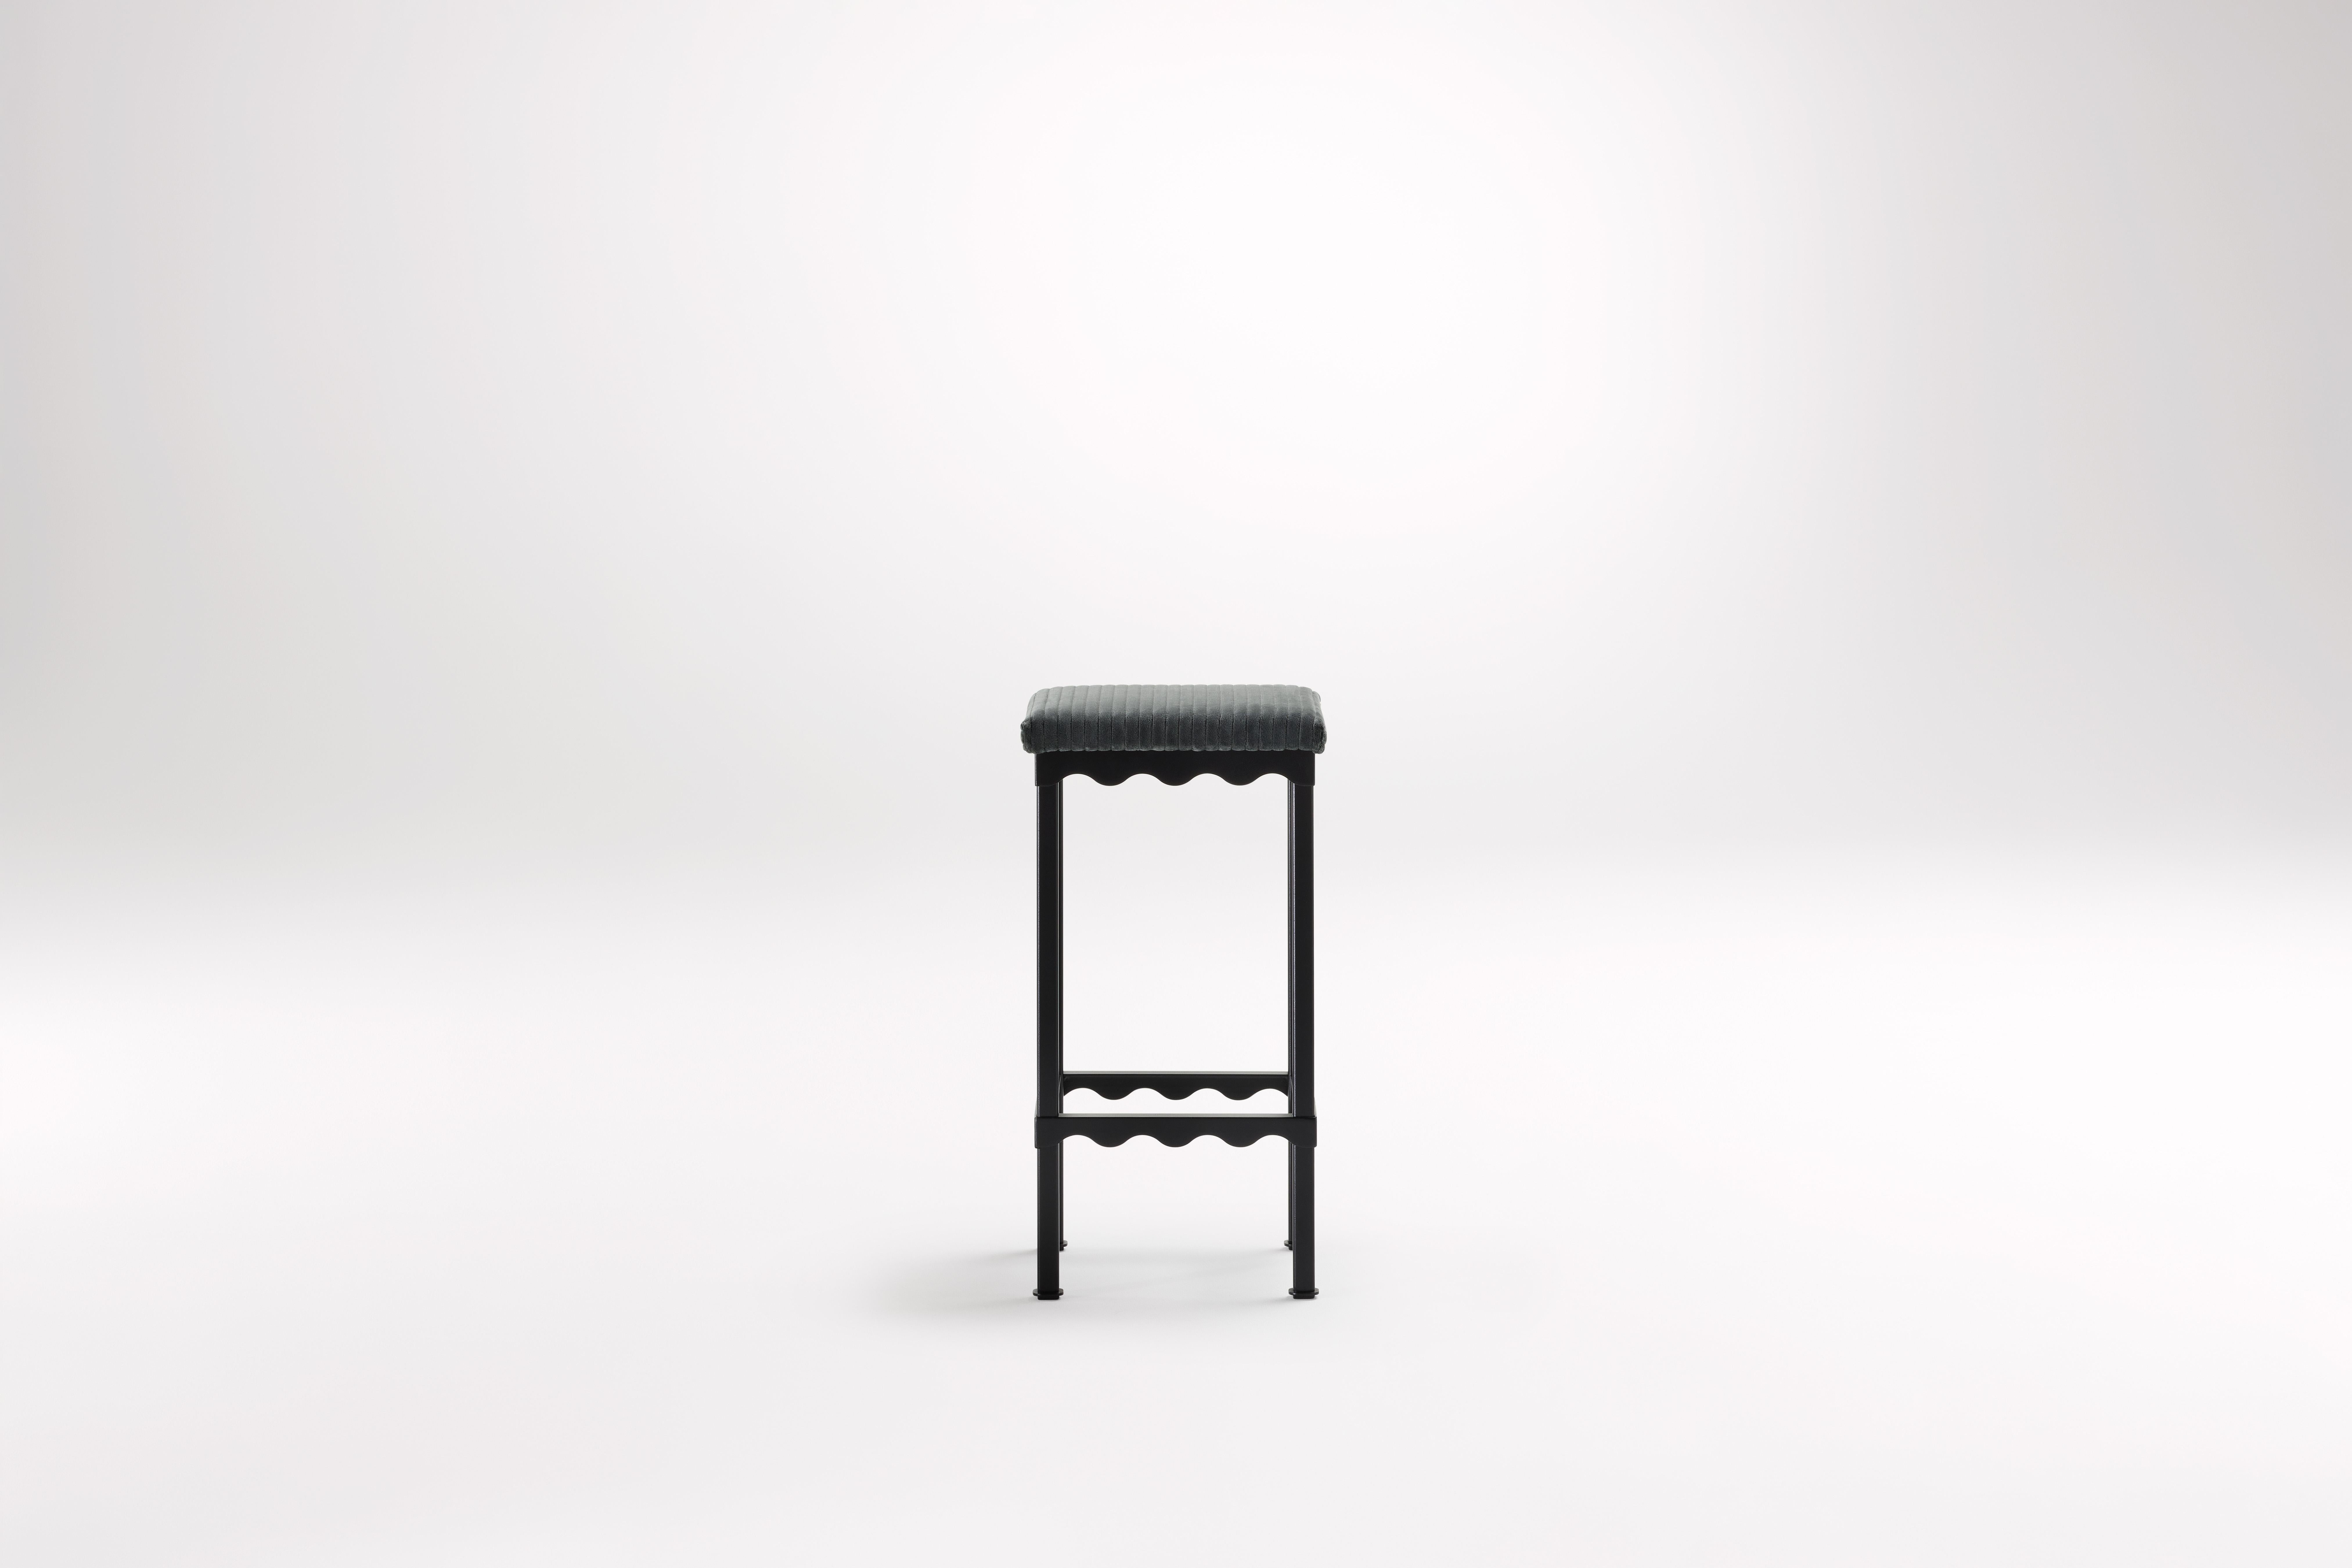 Marmoset Bellini High Stool by Coco Flip
Dimensions: D 34 x W 34 x H 65/75 cm
Materials: Timber / Stone tops, Powder-coated steel frame. 
Weight: 8kg
Frame Finishes: Textura Black.

Coco Flip is a Melbourne based furniture and lighting design